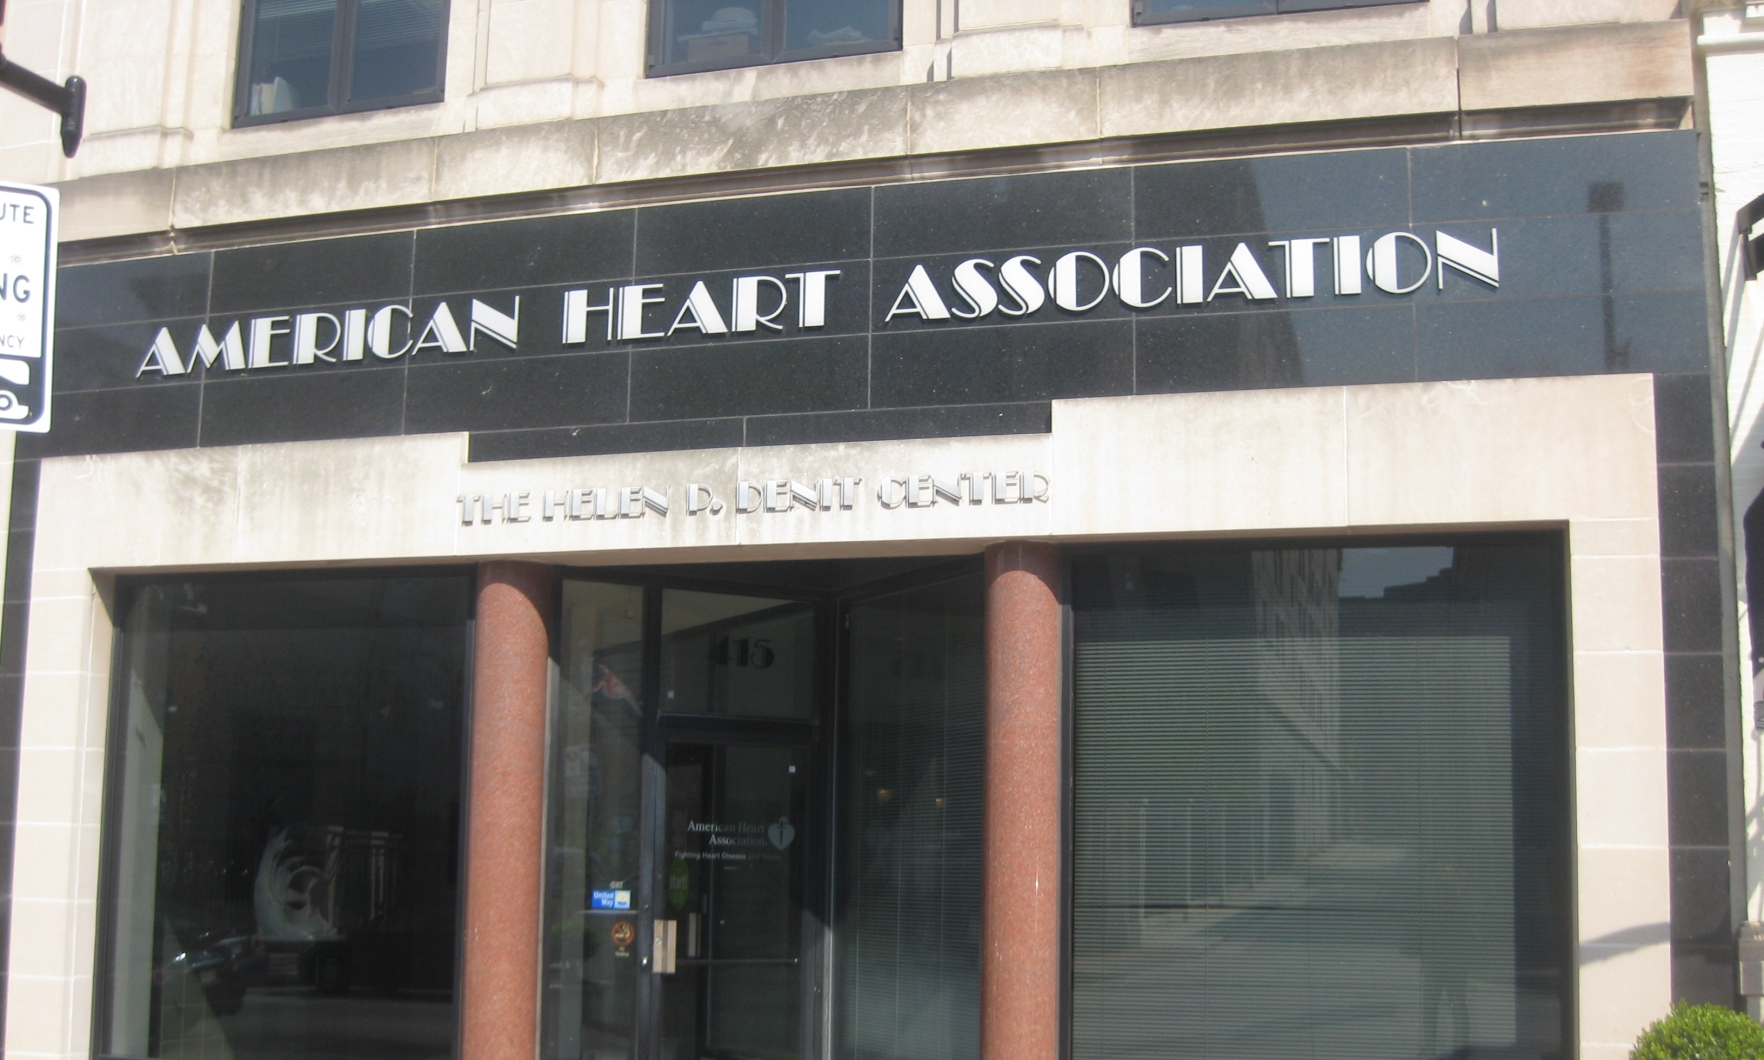 A photograph of the front of the building of the American Heart Association